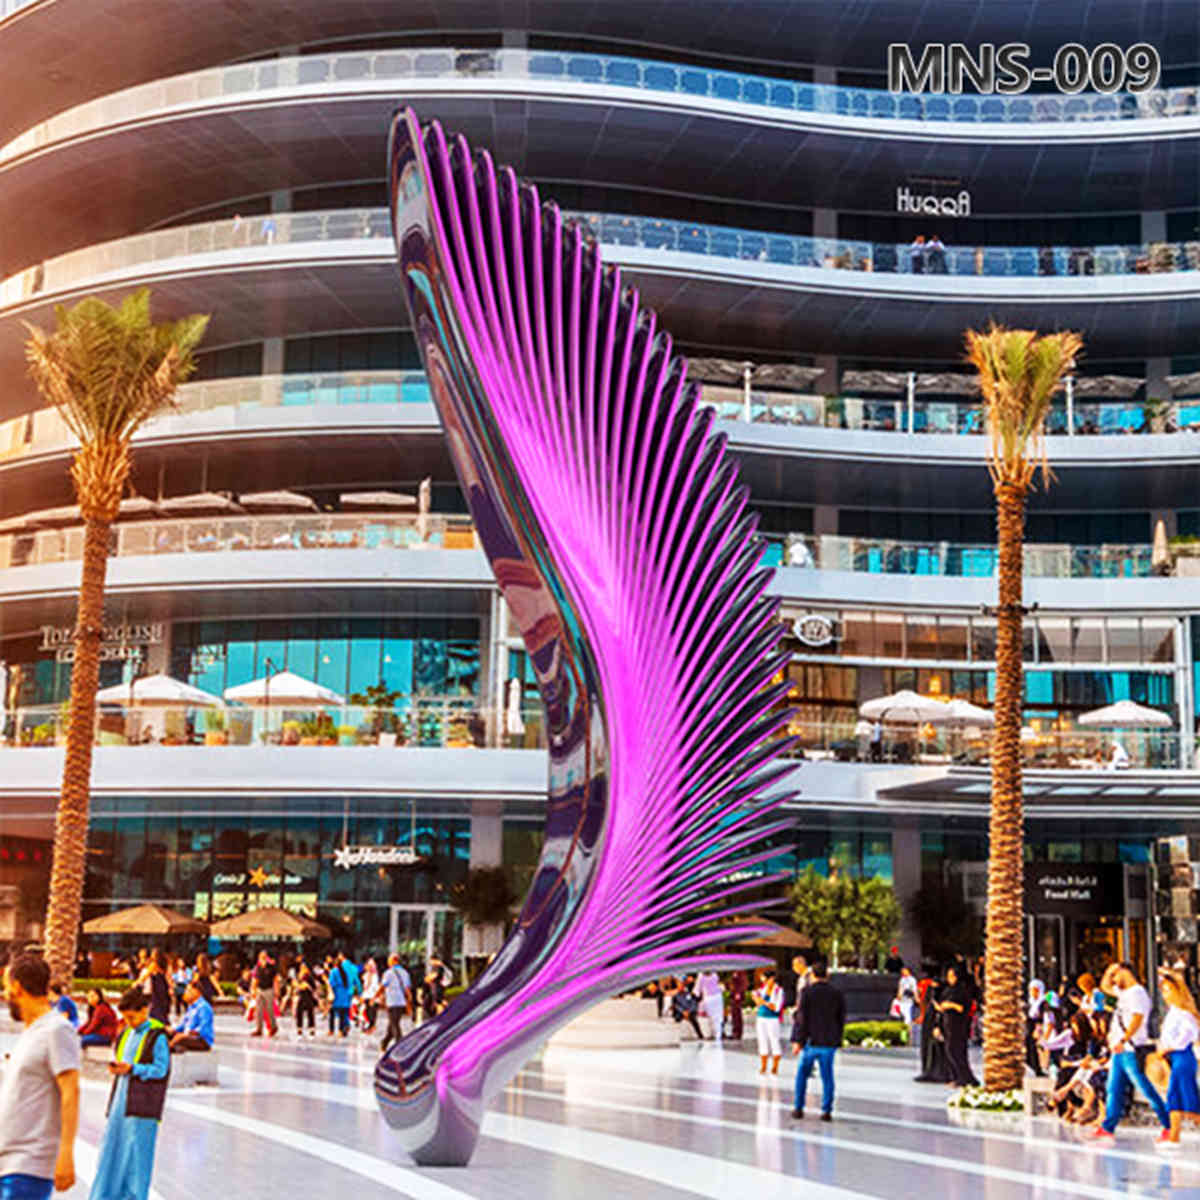 Large Stainless Steel Abstract Wings Sculpture for Public MNS-009